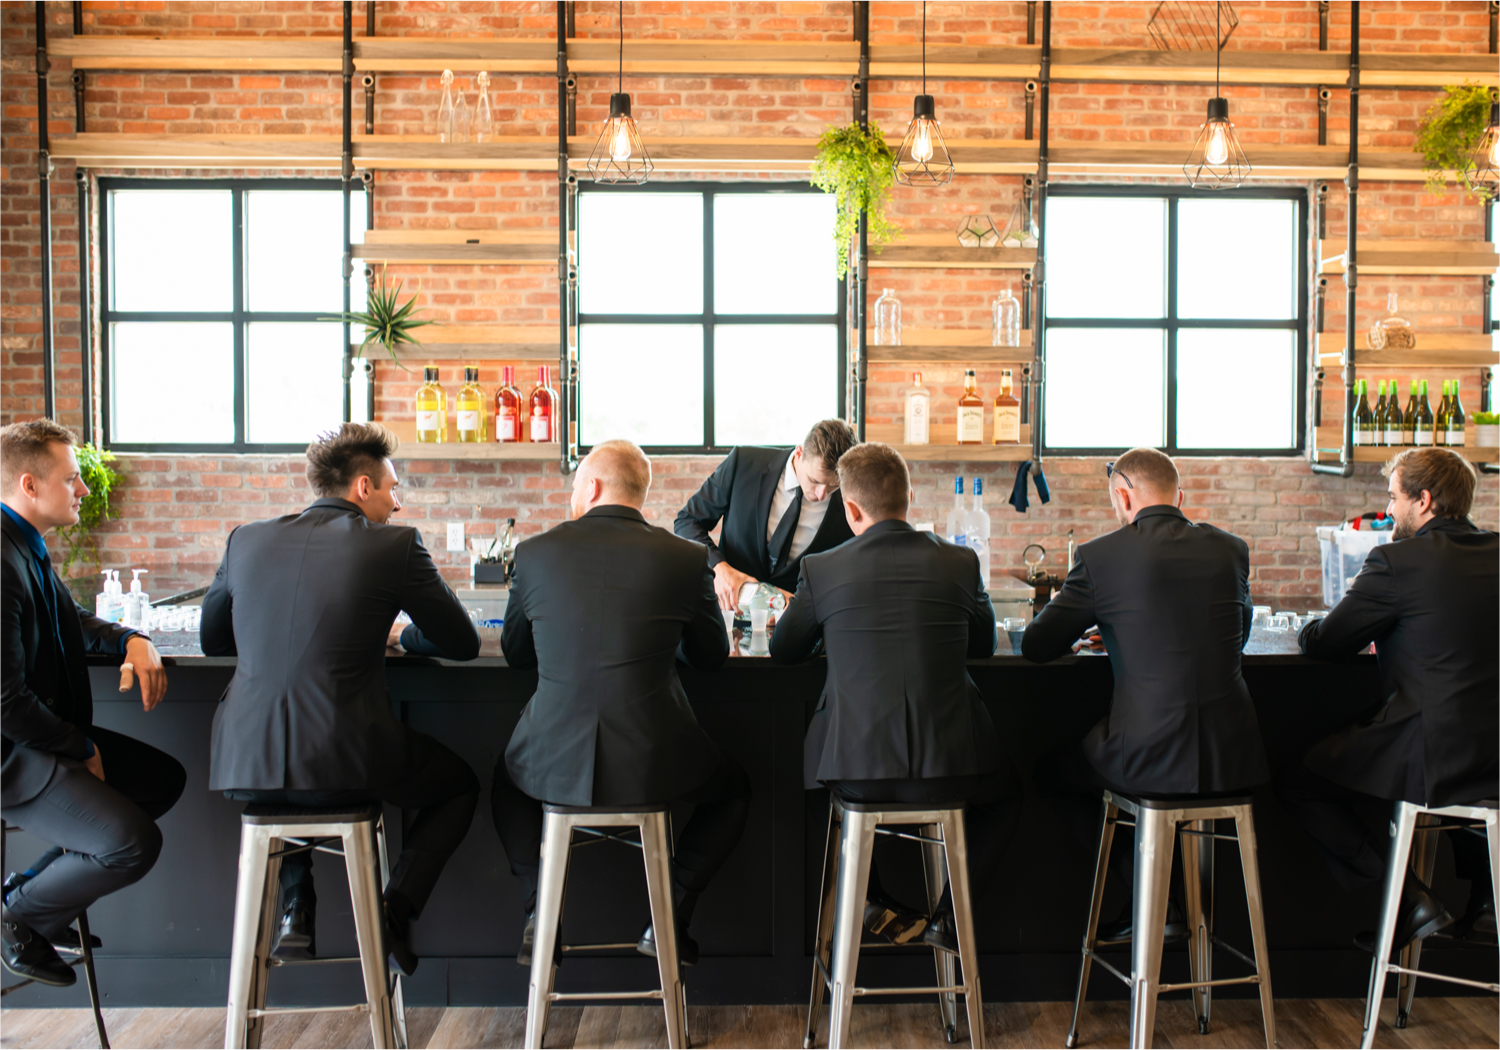 Romantic and Rustic Wedding at The Mill in Windsor | Britni Girard Photography | Colorado based wedding photography and videography team | Groomsmen the the bar at The Windsor Mill | Royal Blue and White Wedding | Groomsmen attire from Express